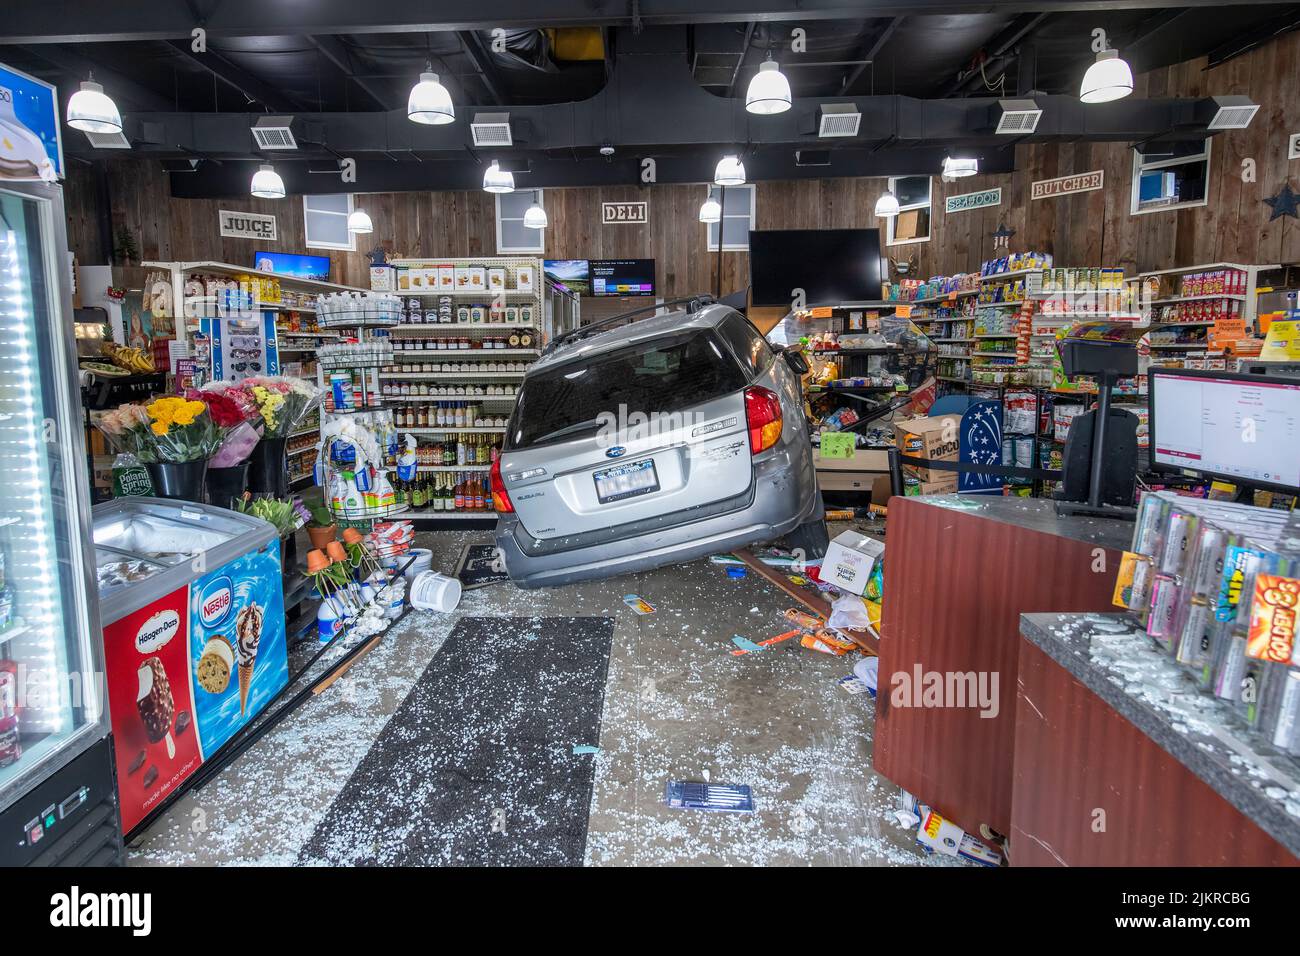 Members of the East Hampton Fire Department responded to a call of a vehicle that had driven through the front doors and into the Hampton Market at 36 Stock Photo